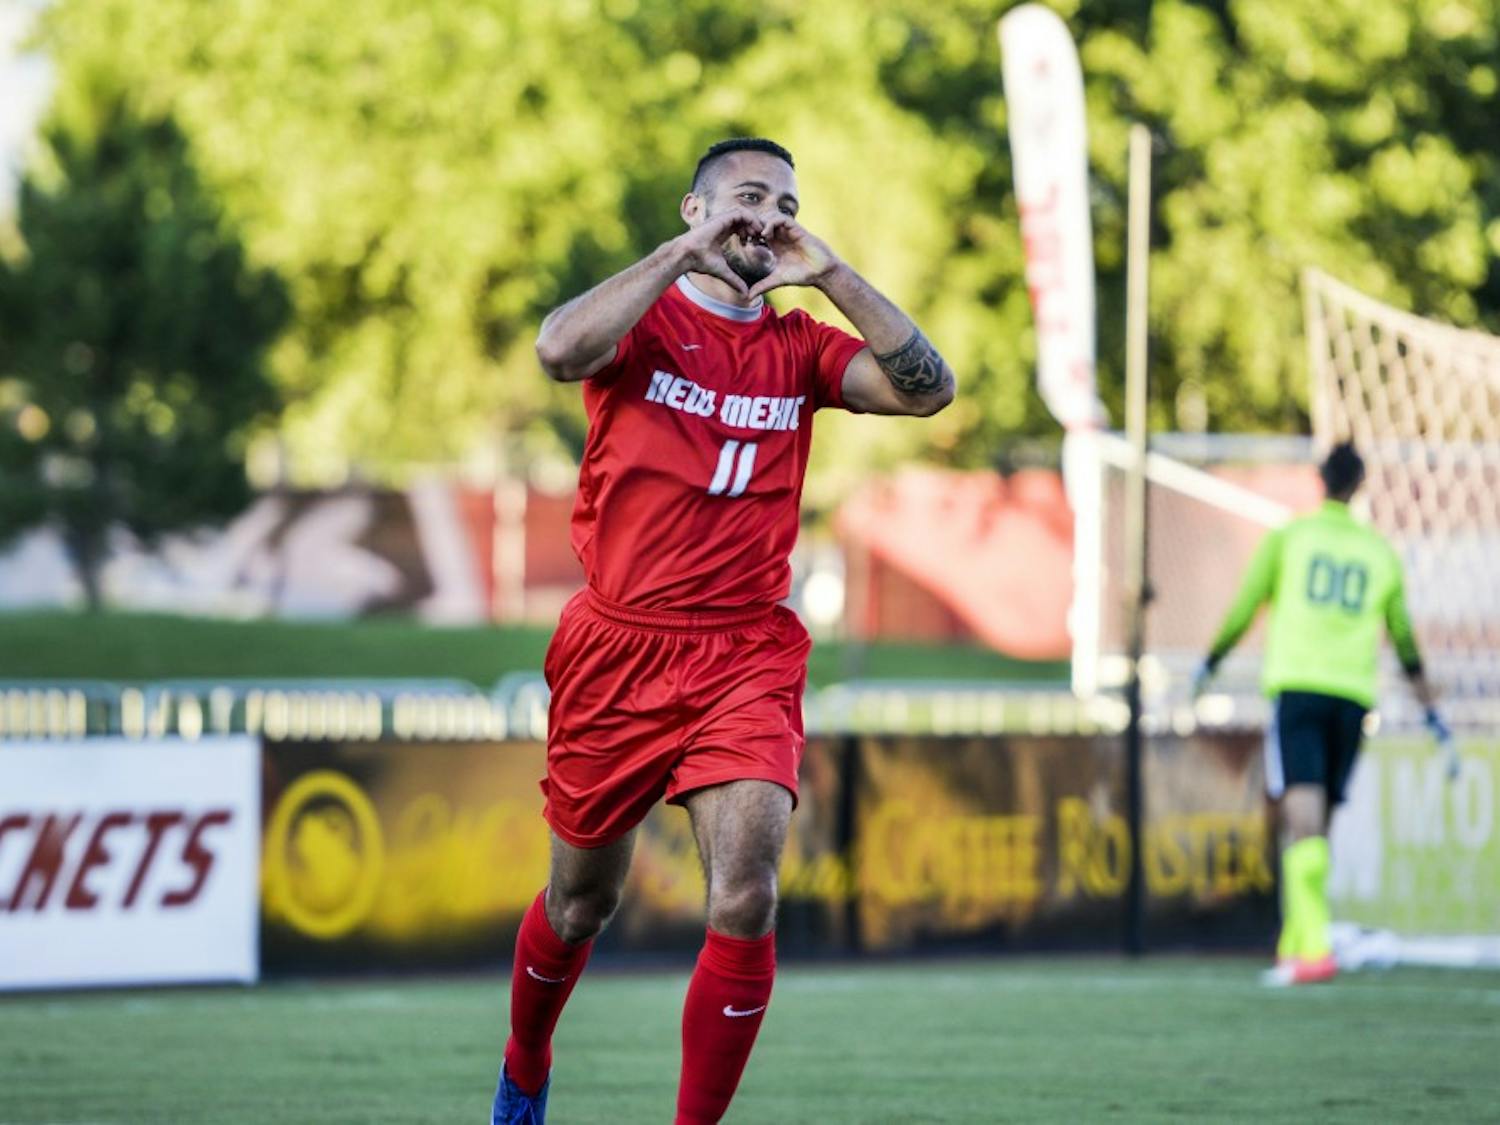 Senior forward Niko Hansen puts up his hands in the shape of a heart after scoring a goal against UNLV Monday August 15, 2016, at the UNM Soccer Complex. The Lobos will play Indiana University this Friday in South Bend, Indiana.